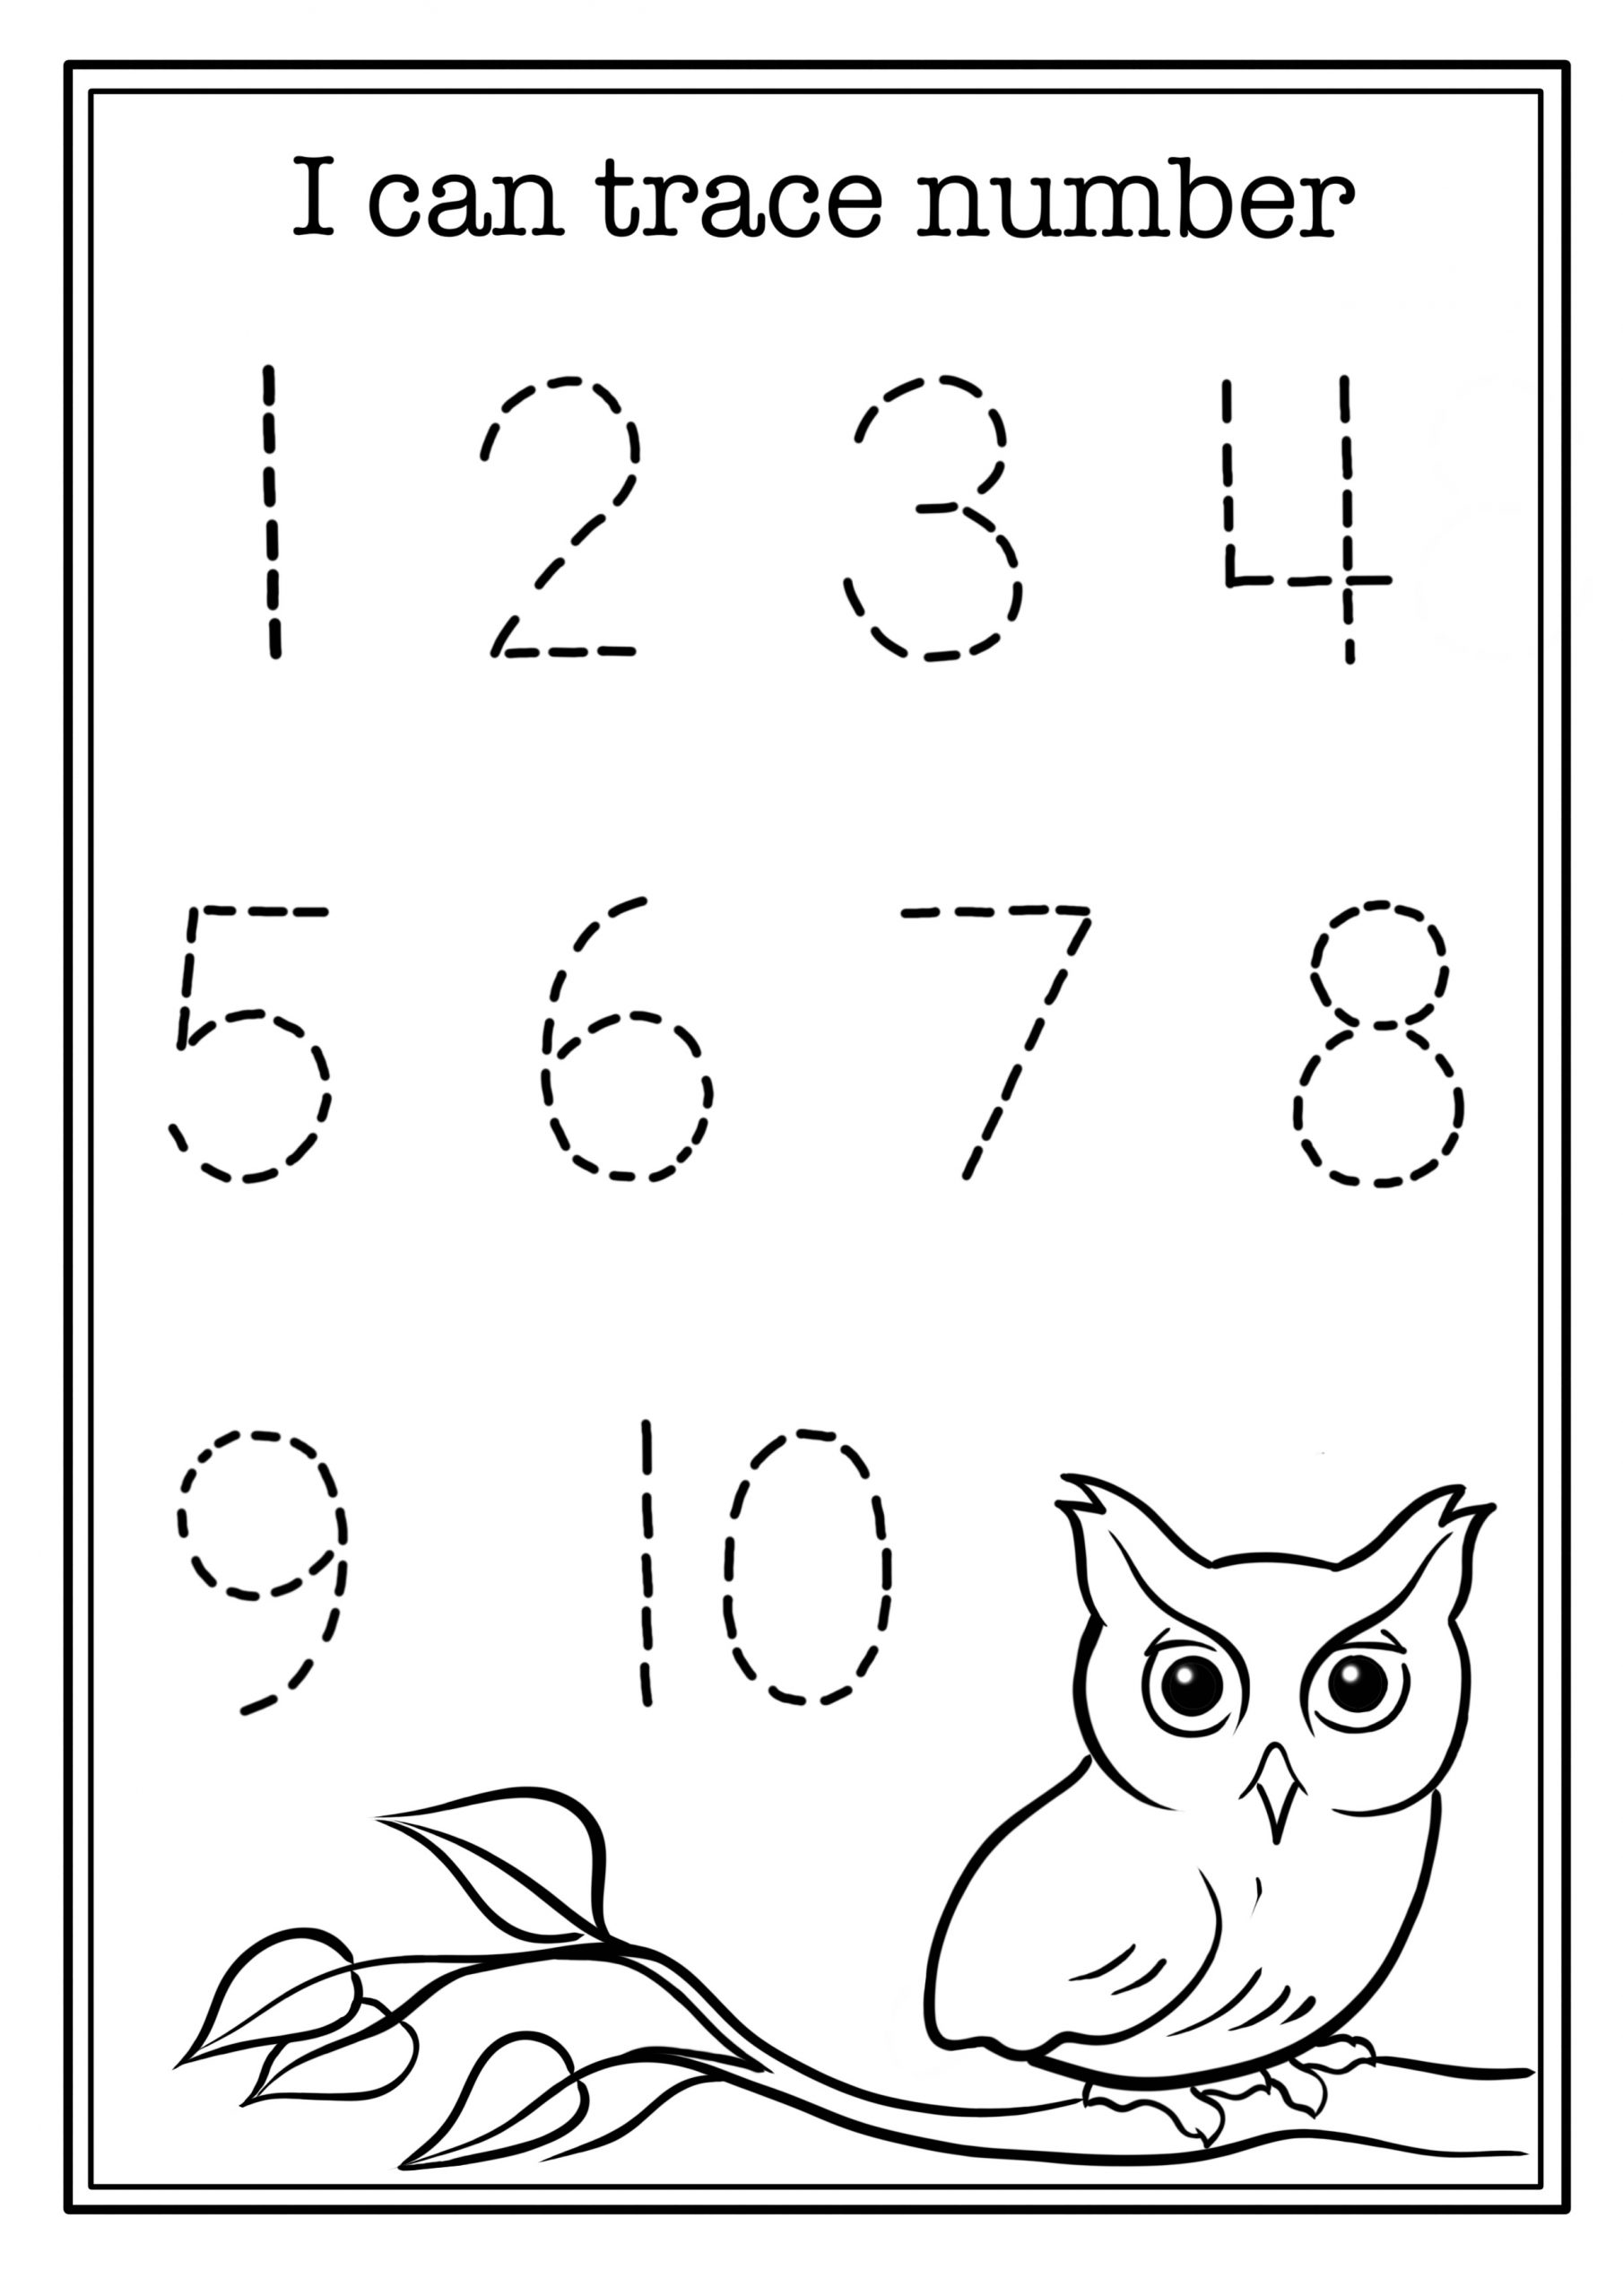 Preschool Lesson Plan on, "Number Recognition 1-10" with Printables